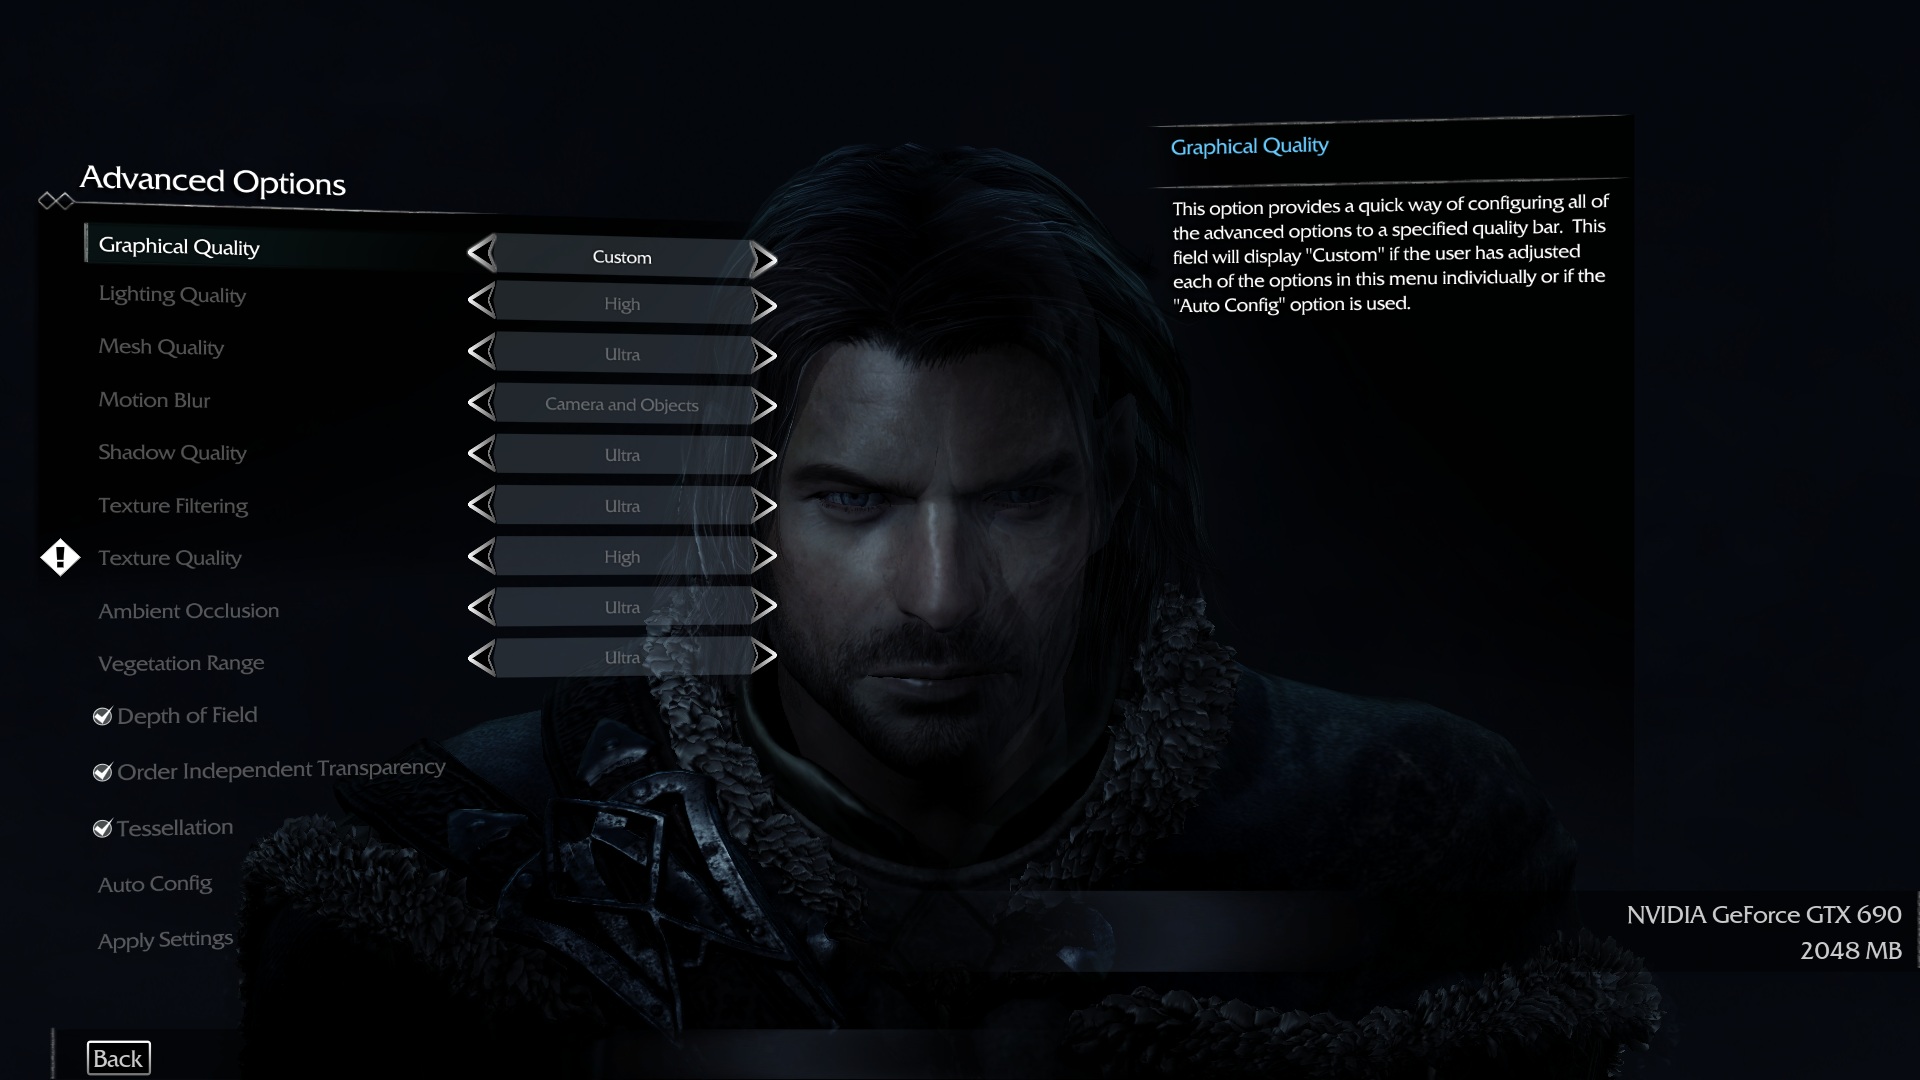 Middle-earth: Shadow of Mordor Tweaks Guide to Improve Graphics